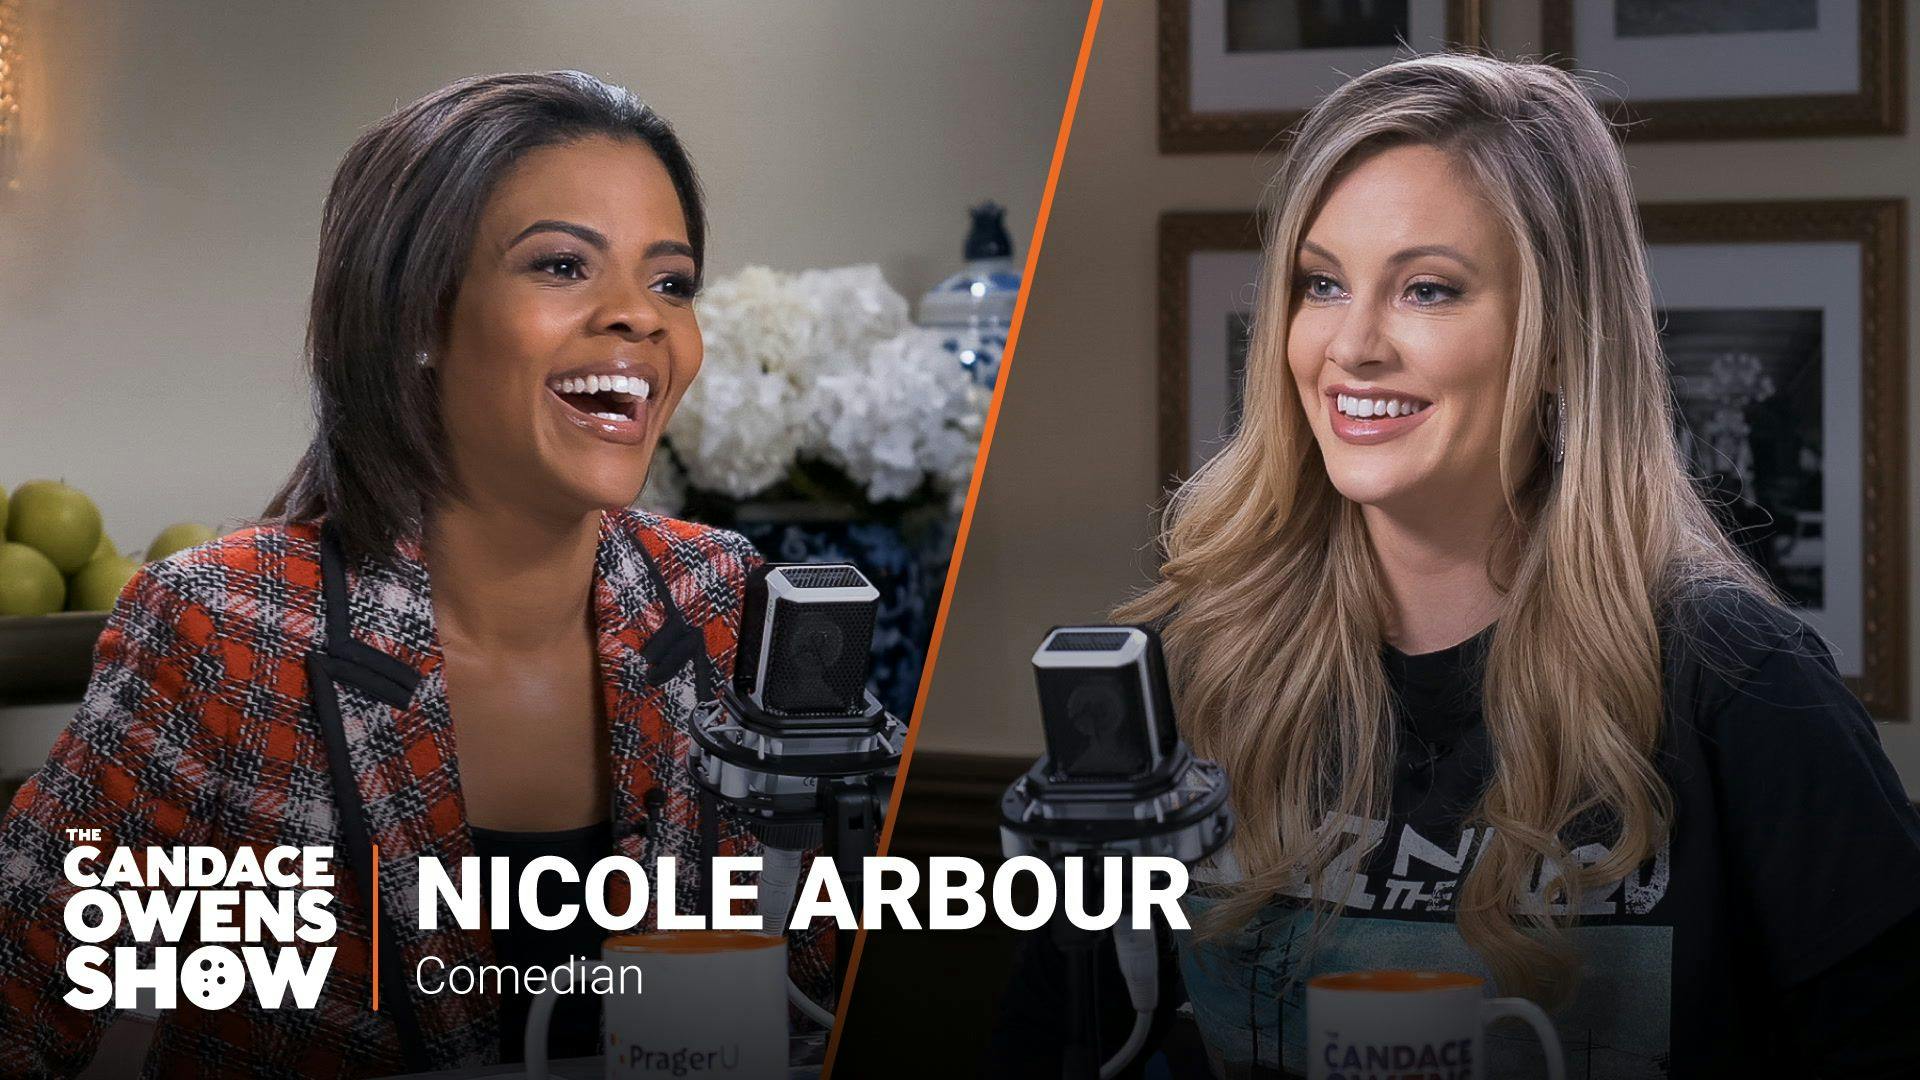 The Candace Owens Show: Nicole Arbour